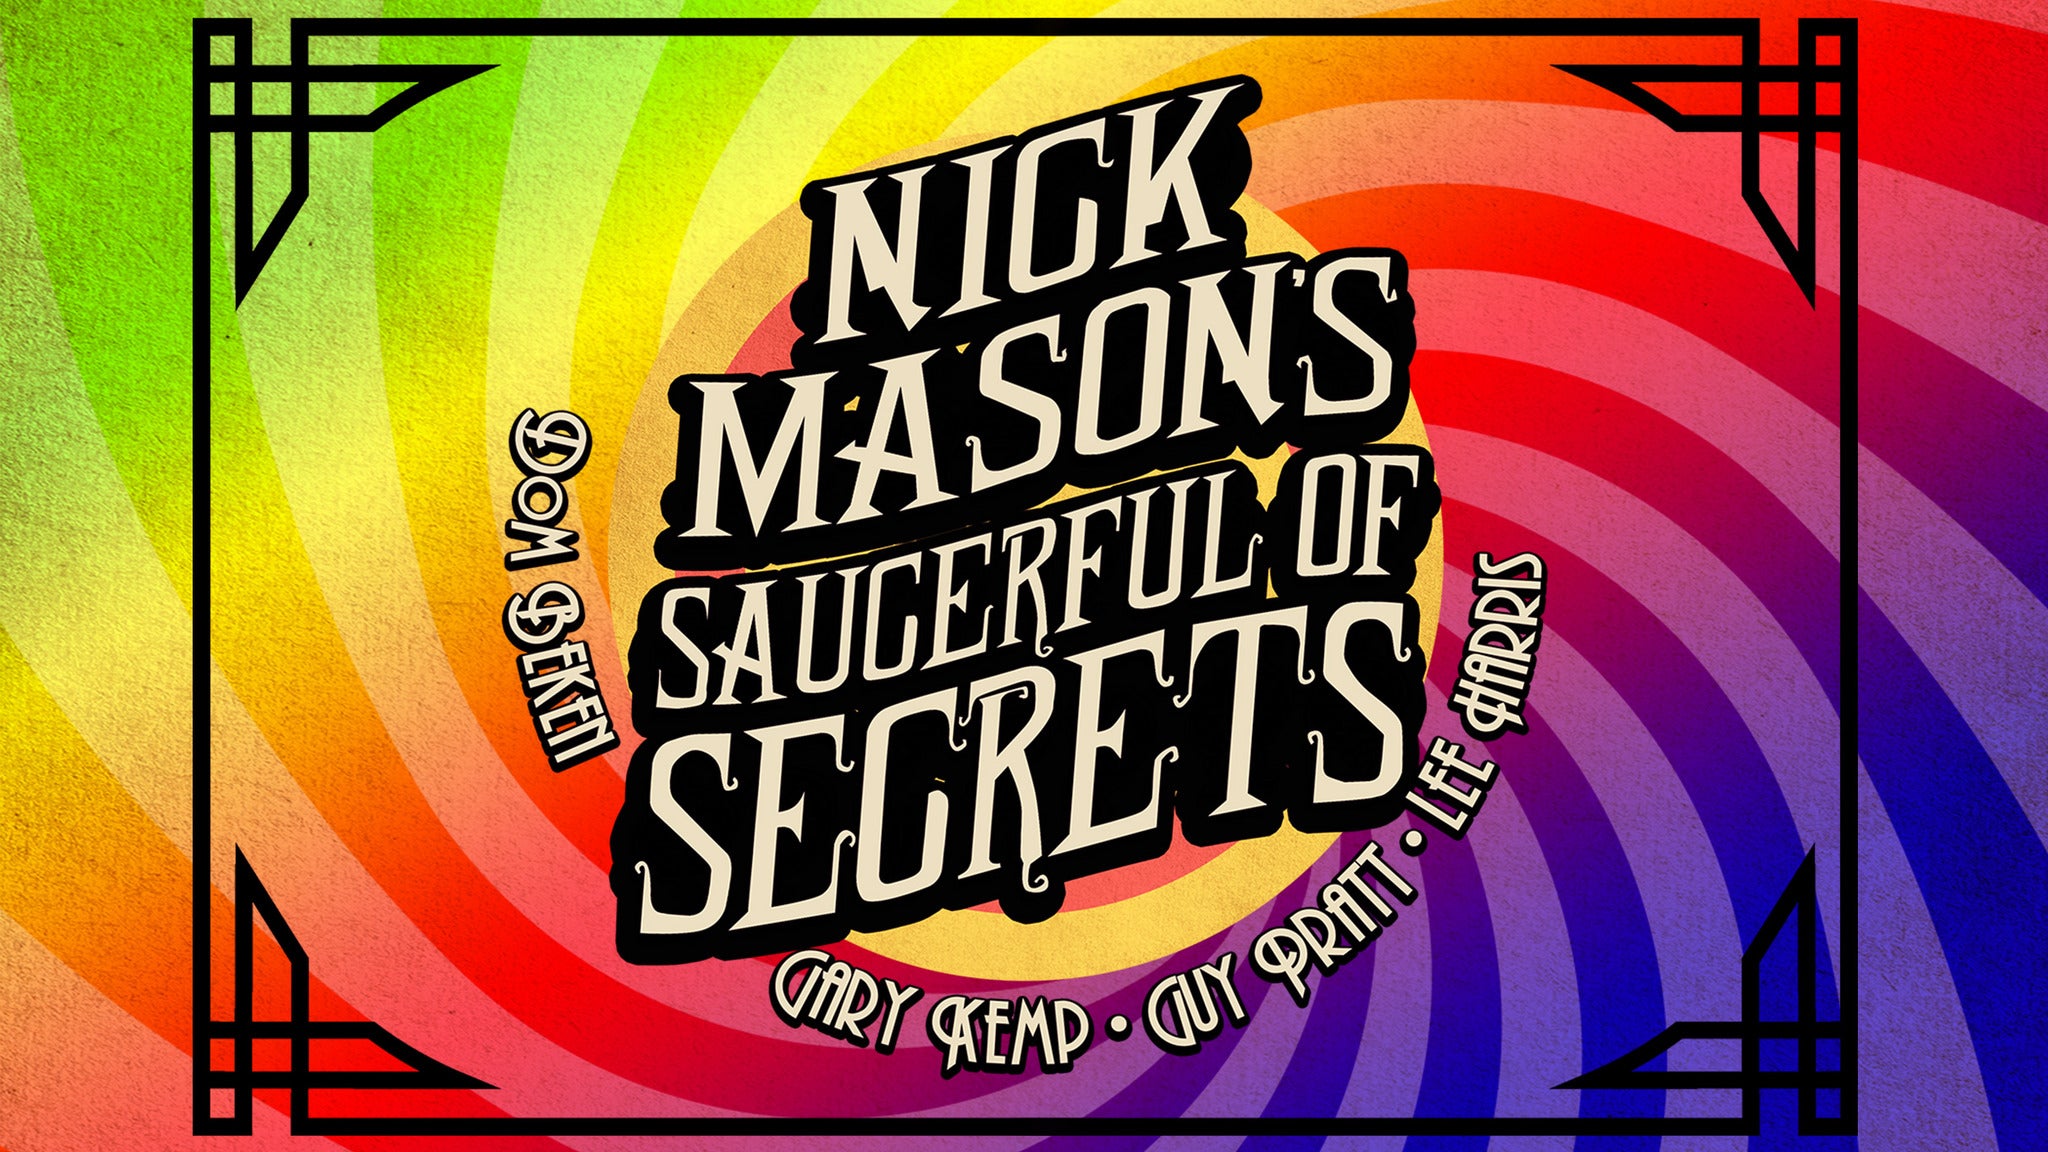 Nick Mason's Saucerful Of Secrets presale password for early tickets in Los Angeles